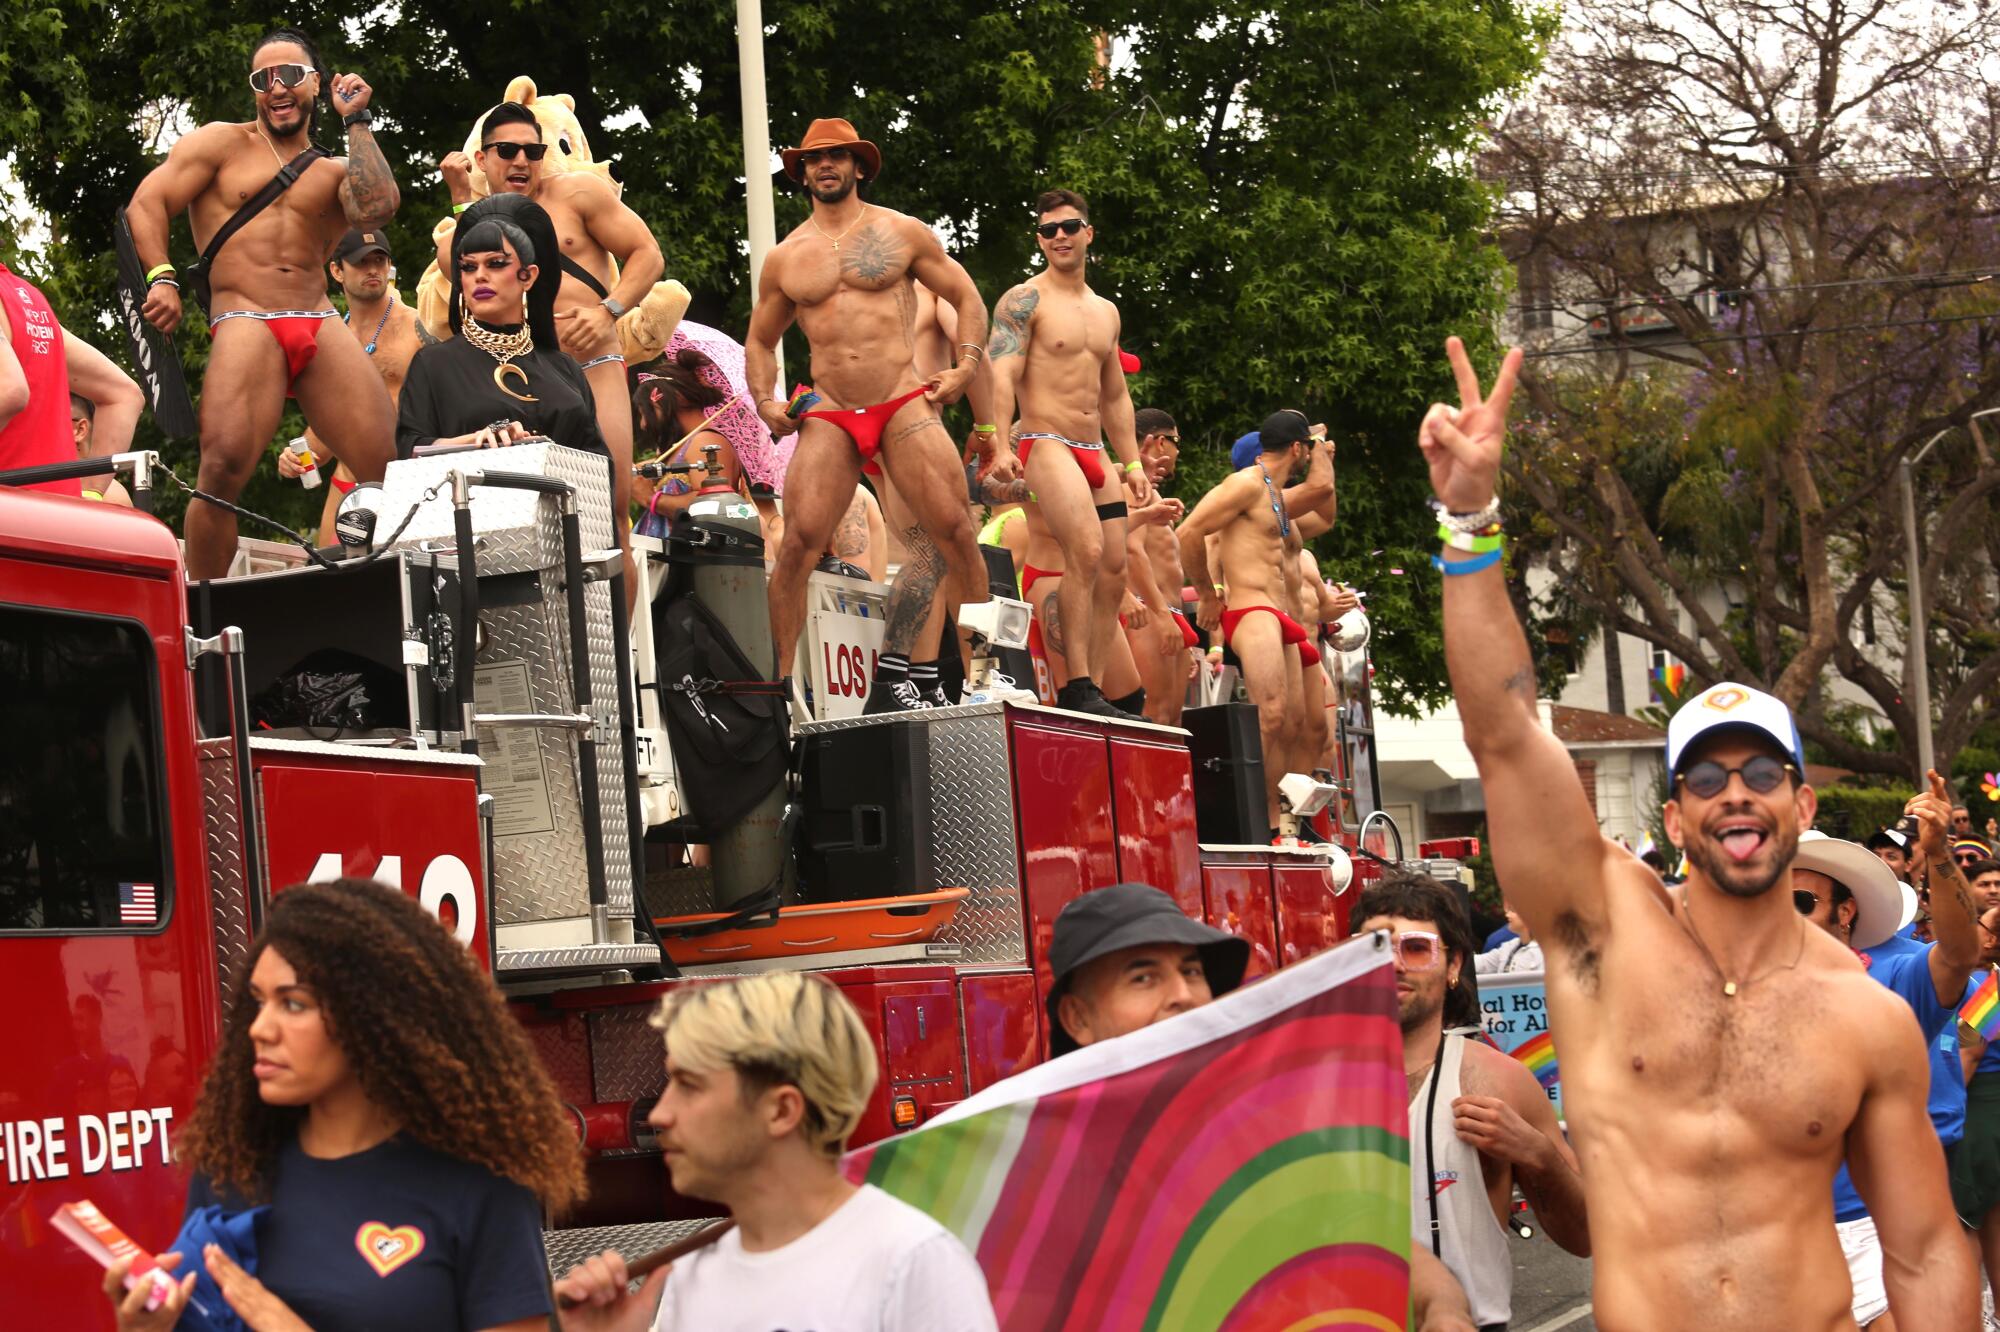 Muscular men in tiny red briefs atop a fire truck.